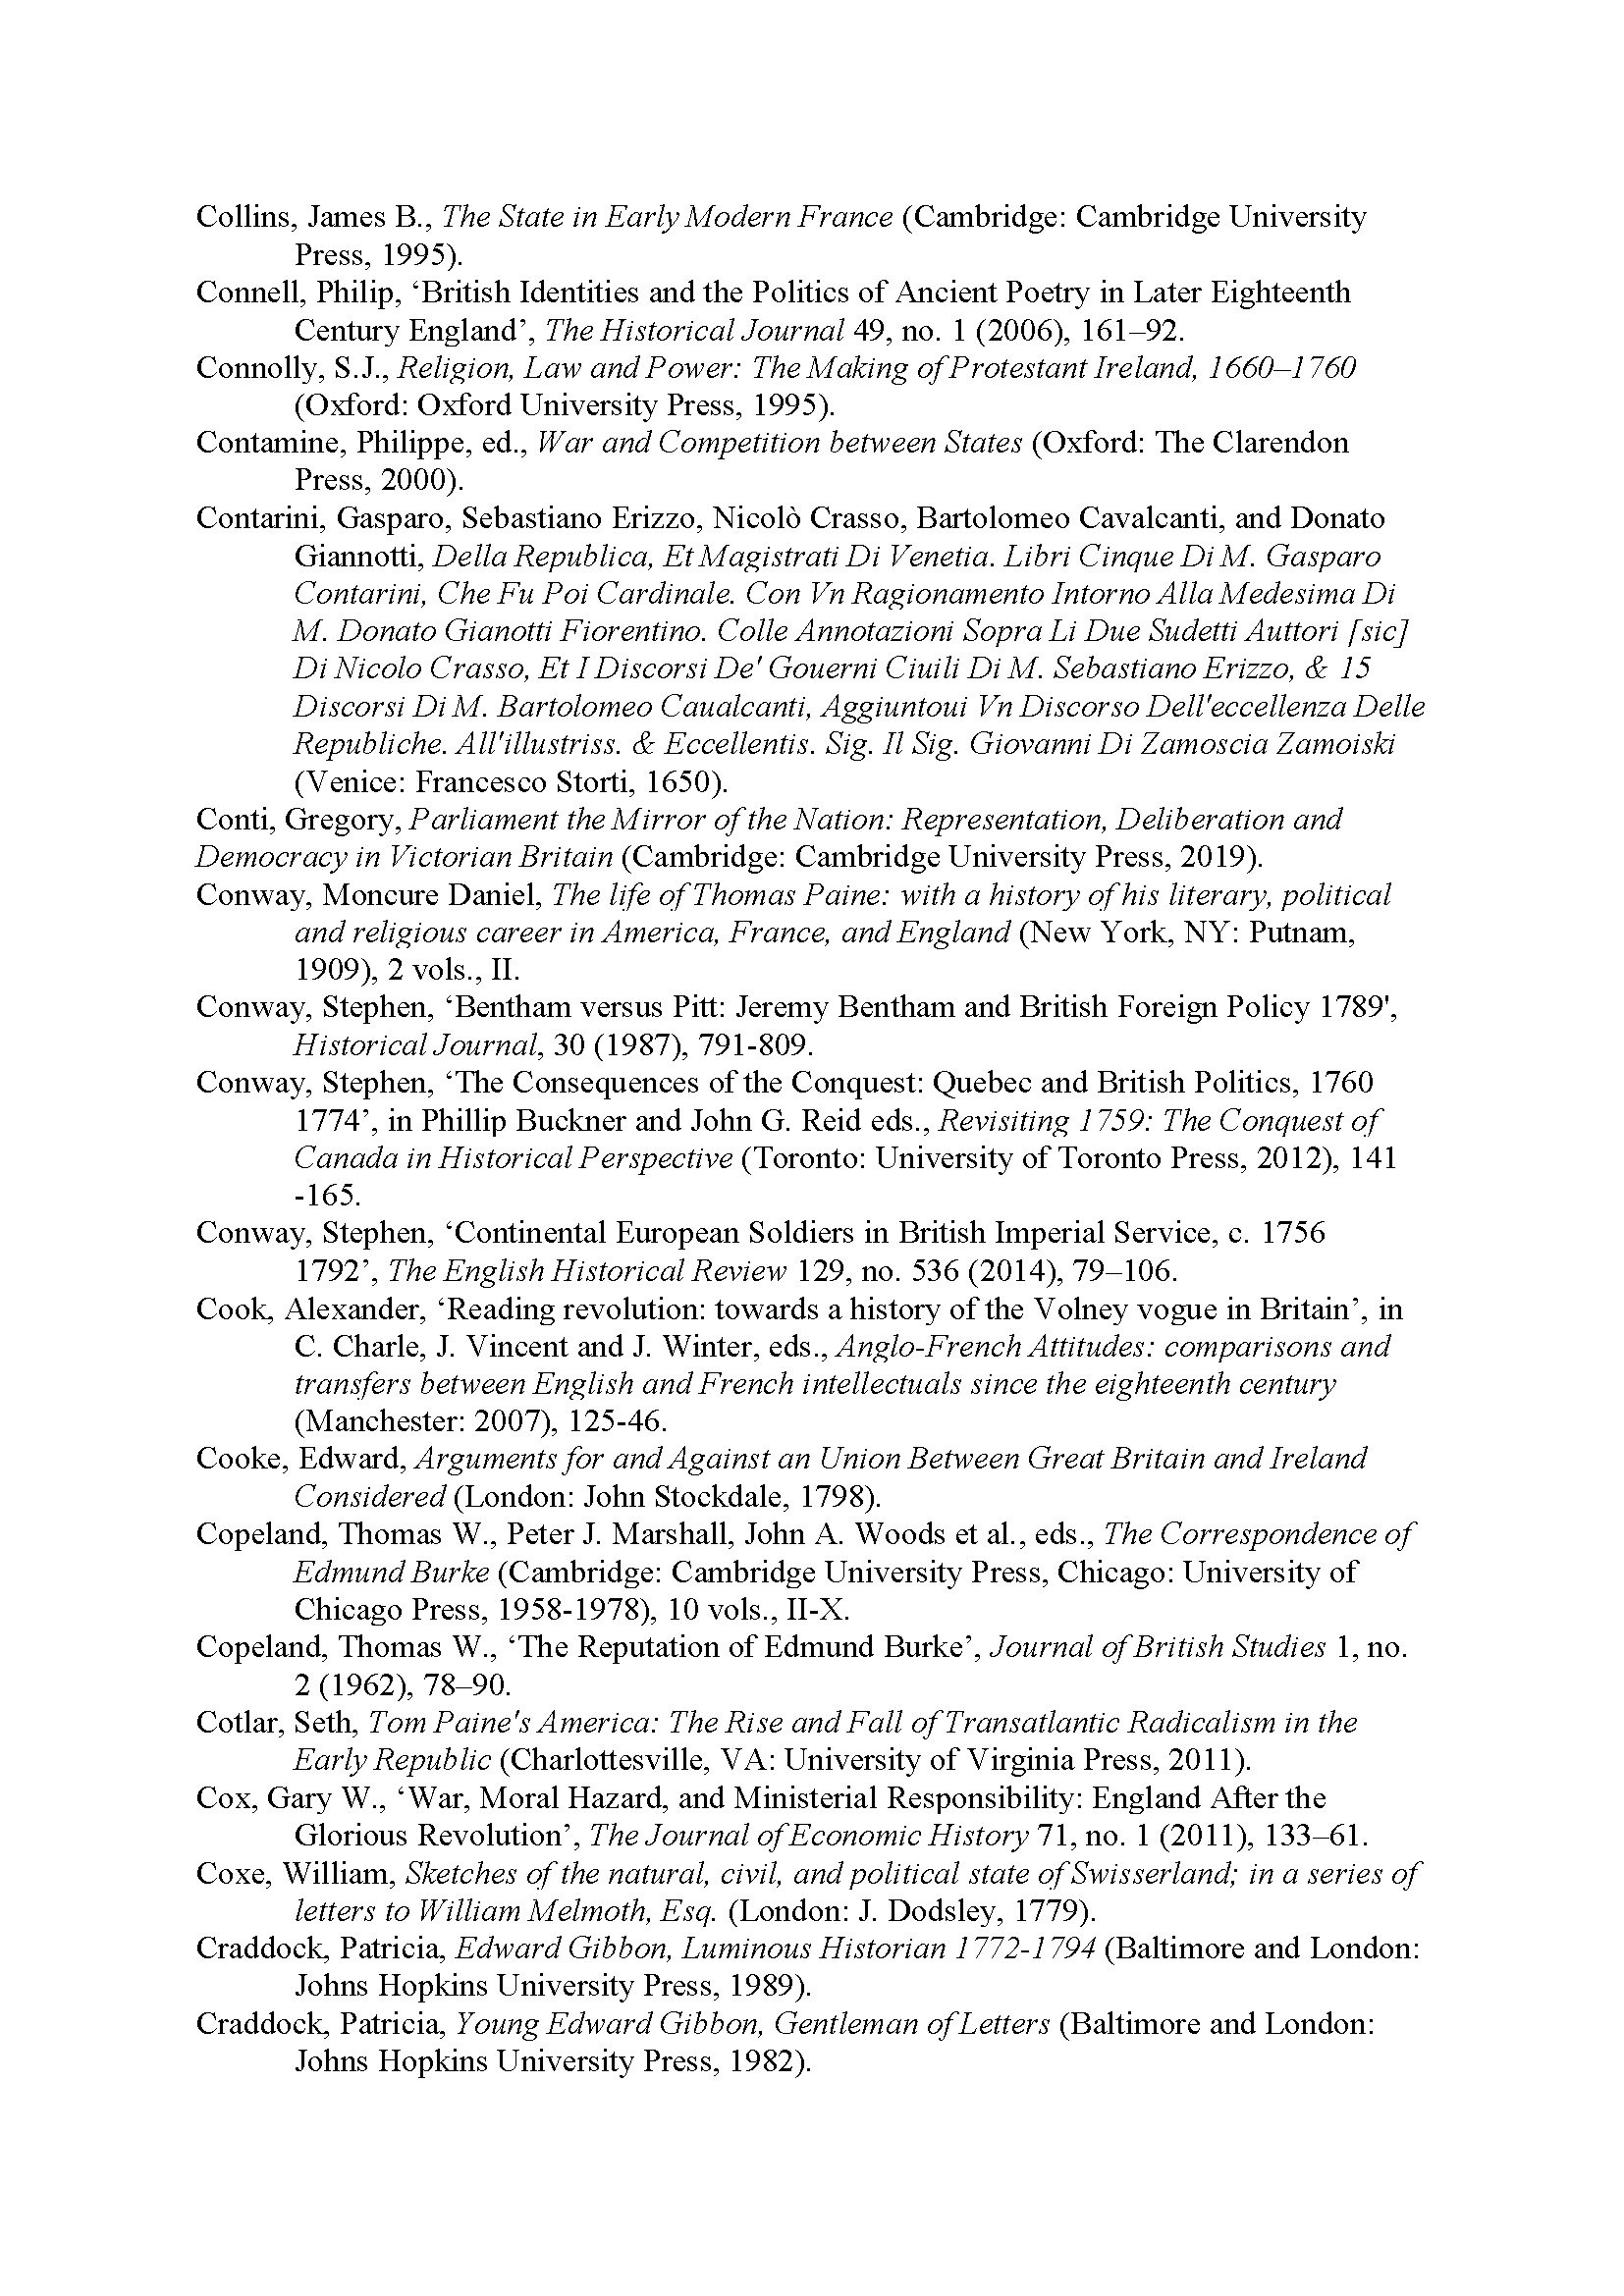 End of the Enlightment_Bibliography[25]_Page_11.jpg